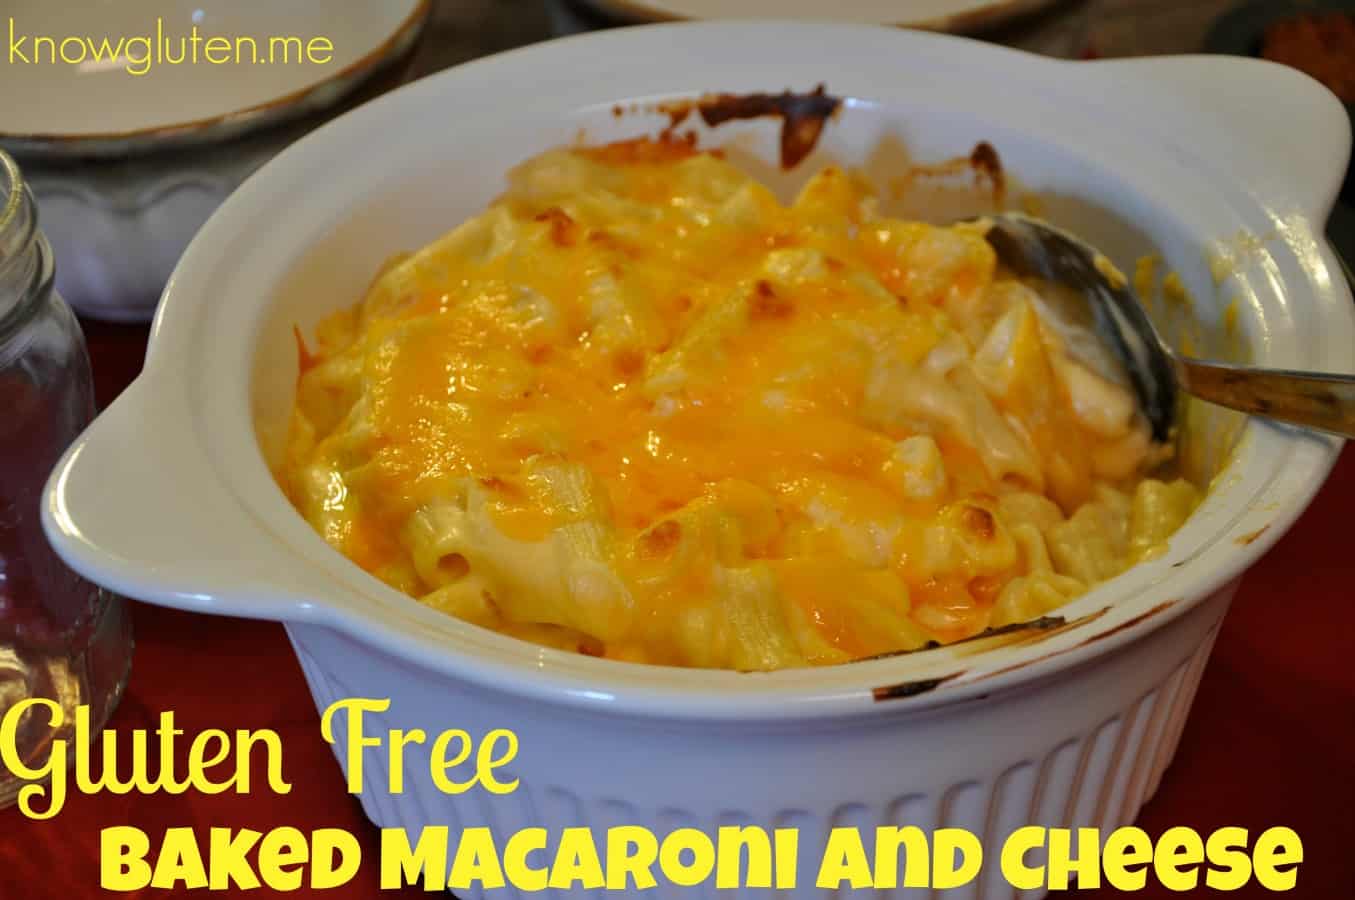 Easy Gluten Free Baked Macaroni and Cheese from knowgluten.me - comforting family dinner